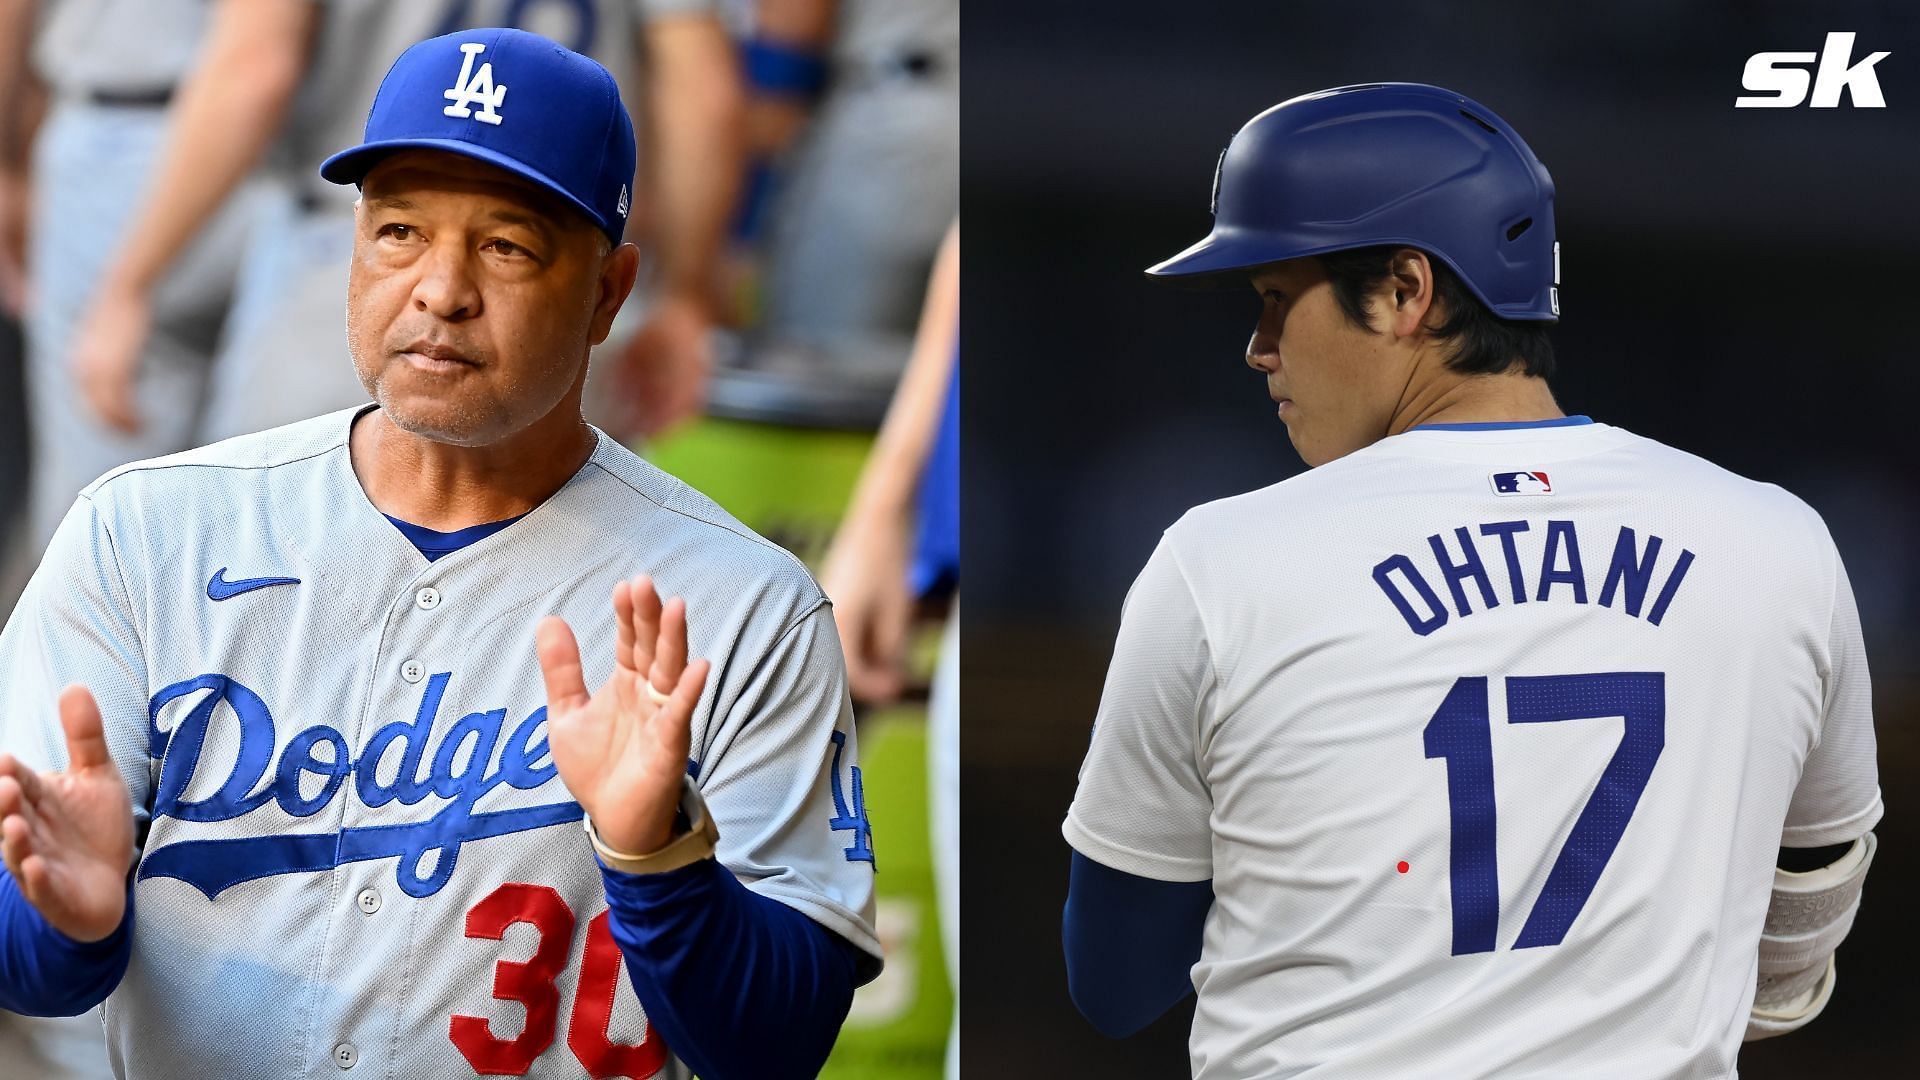 Dodgers manager Dave Roberts commended Shohei Ohtani